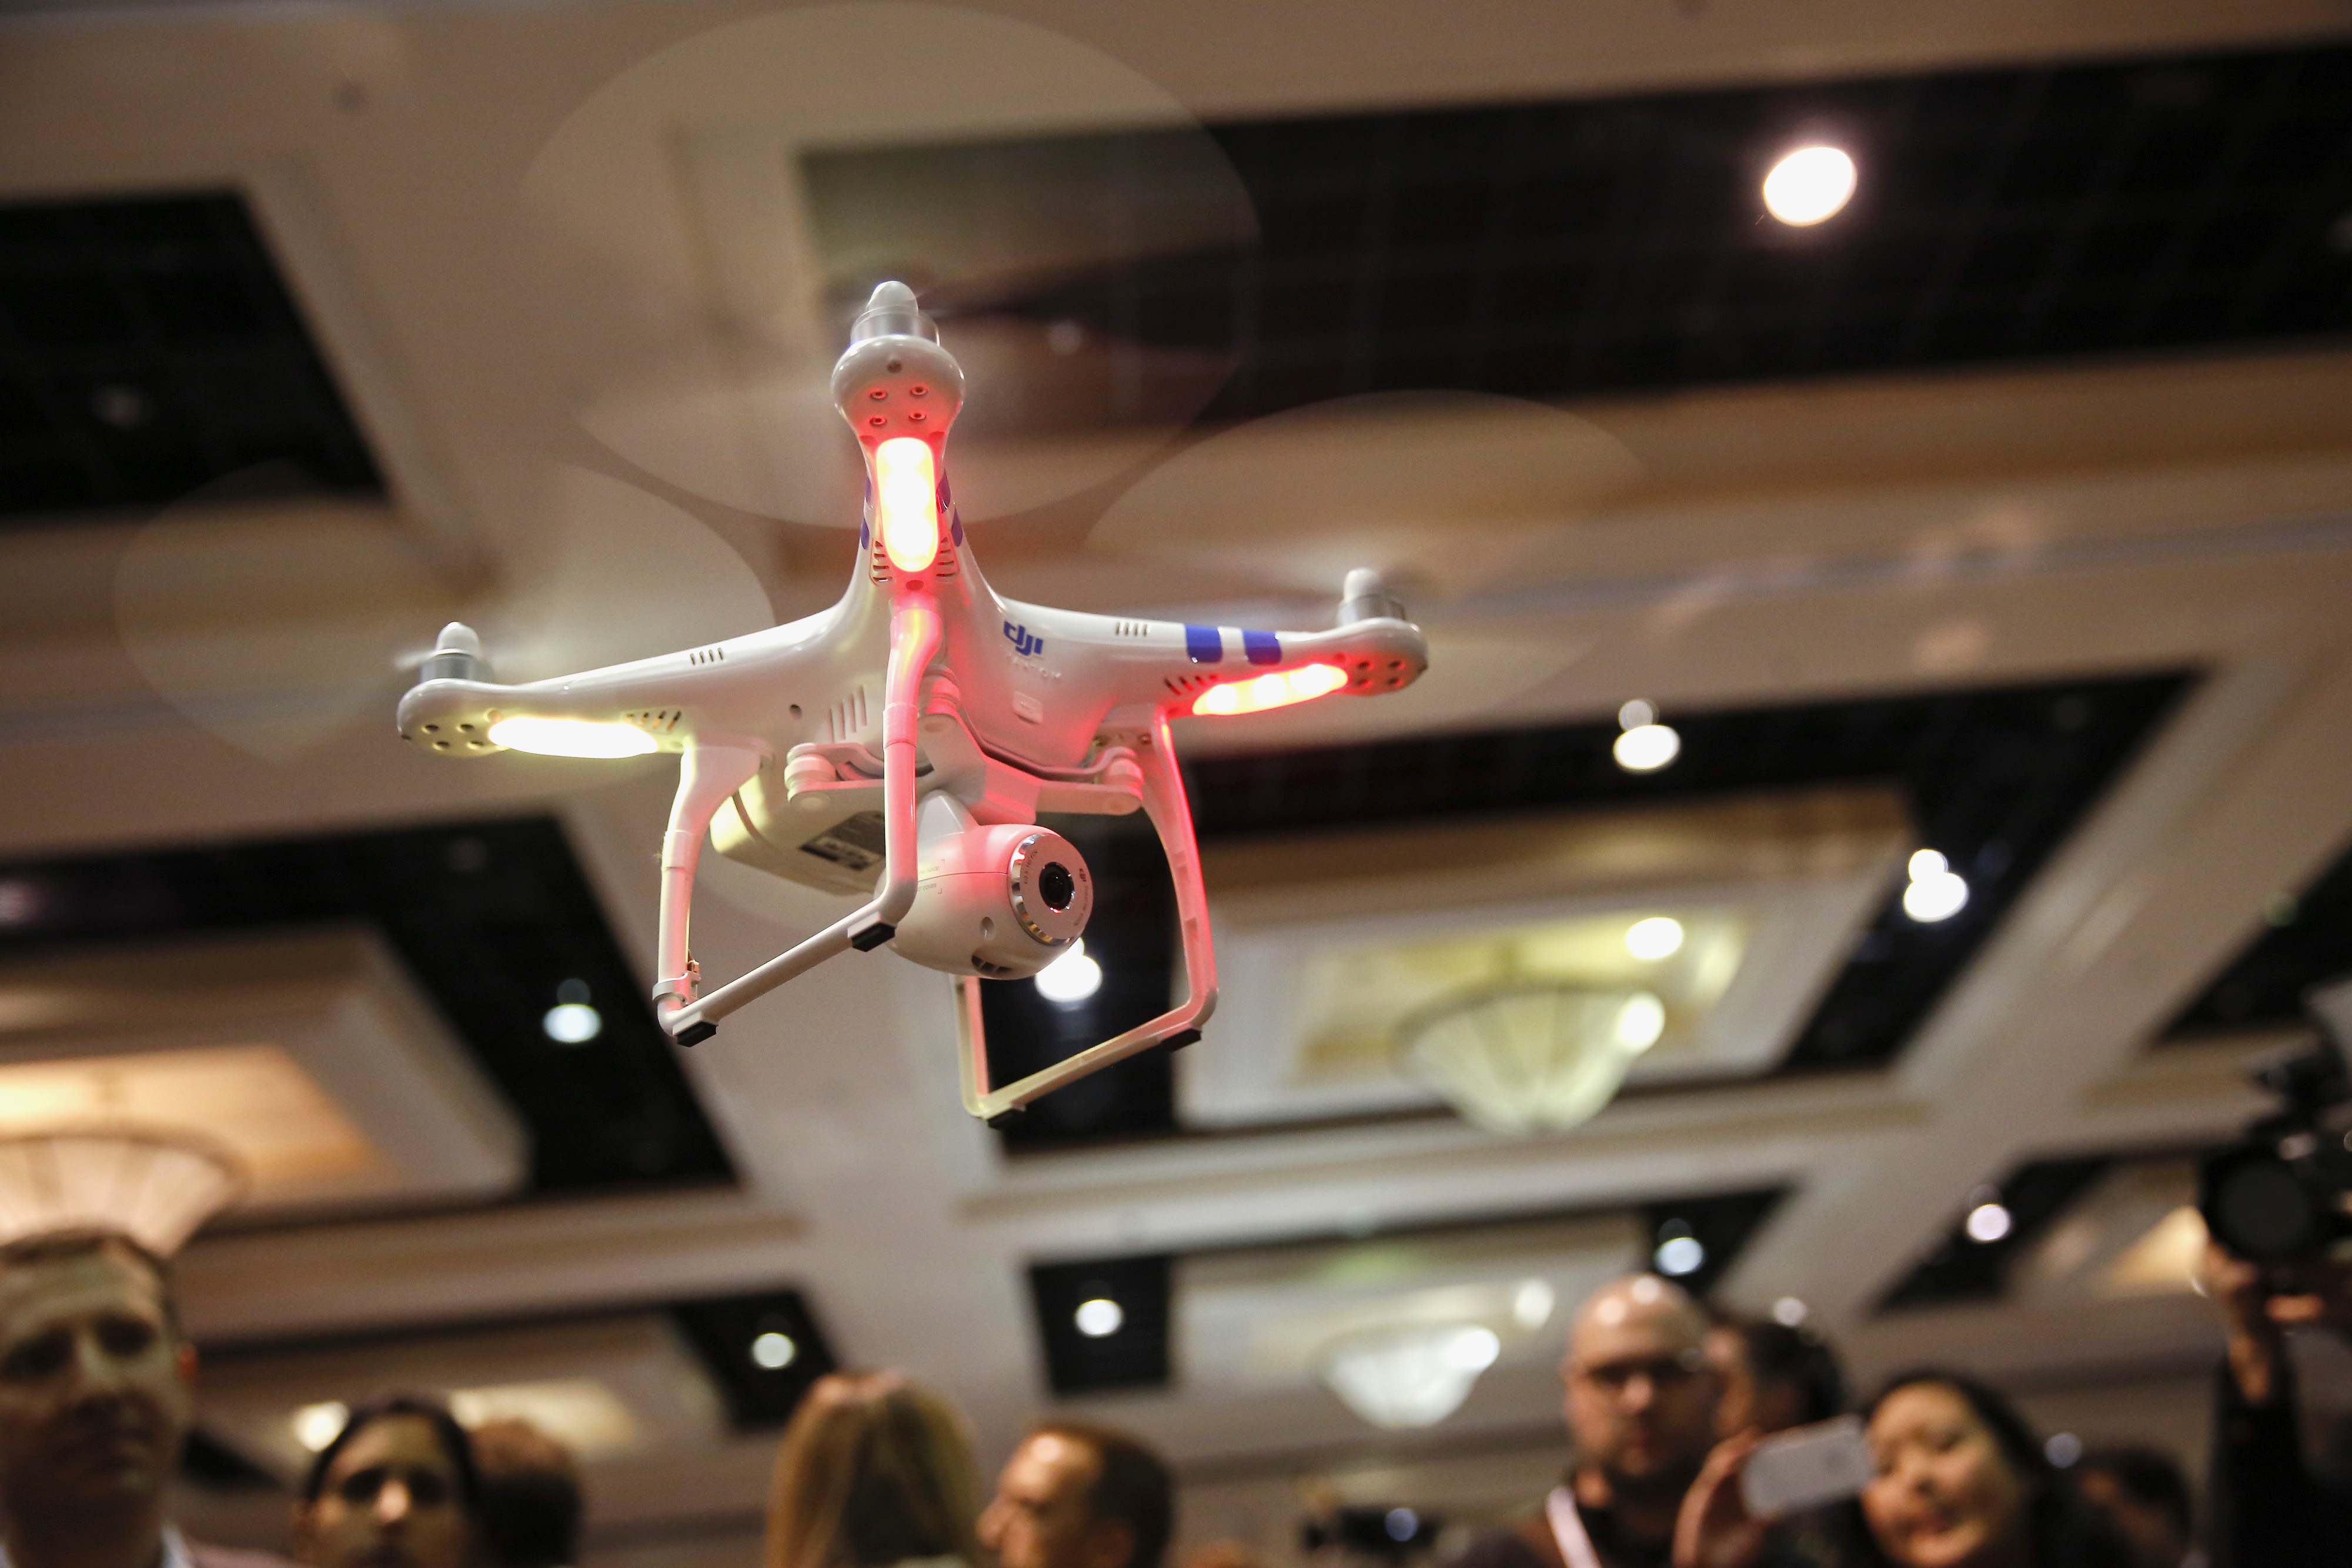 A DJI Innovations Phantom remote-controlled drone hovers above attendees during the CES Unveiled press event prior to the 2014 Consumer Electronics Show in Las Vegas, Nevada, U.S., on Sunday, Jan. 5, 2014. (Bloomberg&mdash;Bloomberg via Getty Images)